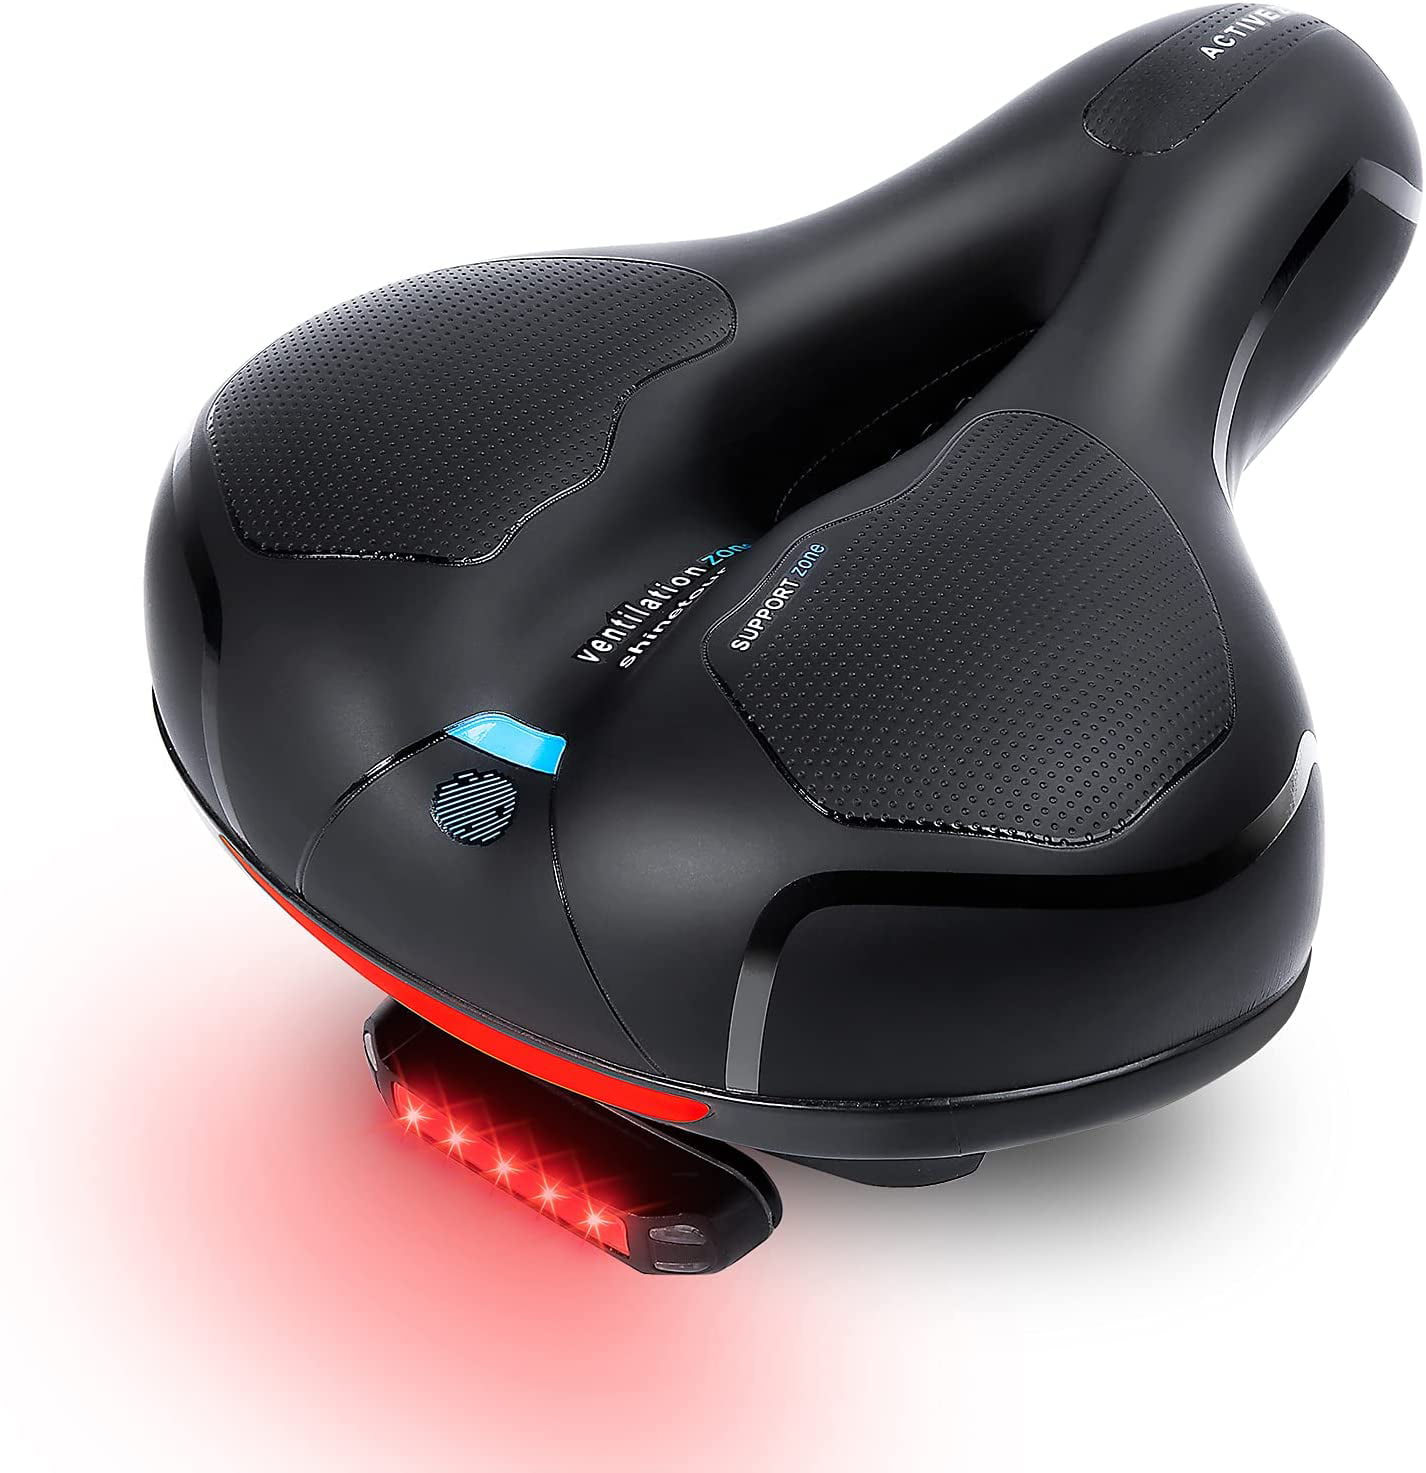 Bike Seat Bicycle Seat for Men and Women, Bike Saddle Bicycle Seat Cushion with Reflect Taillight, Wide and Comfortable, Universal Fit, Comes with Mounting Wrench and Protection Seat Cover 